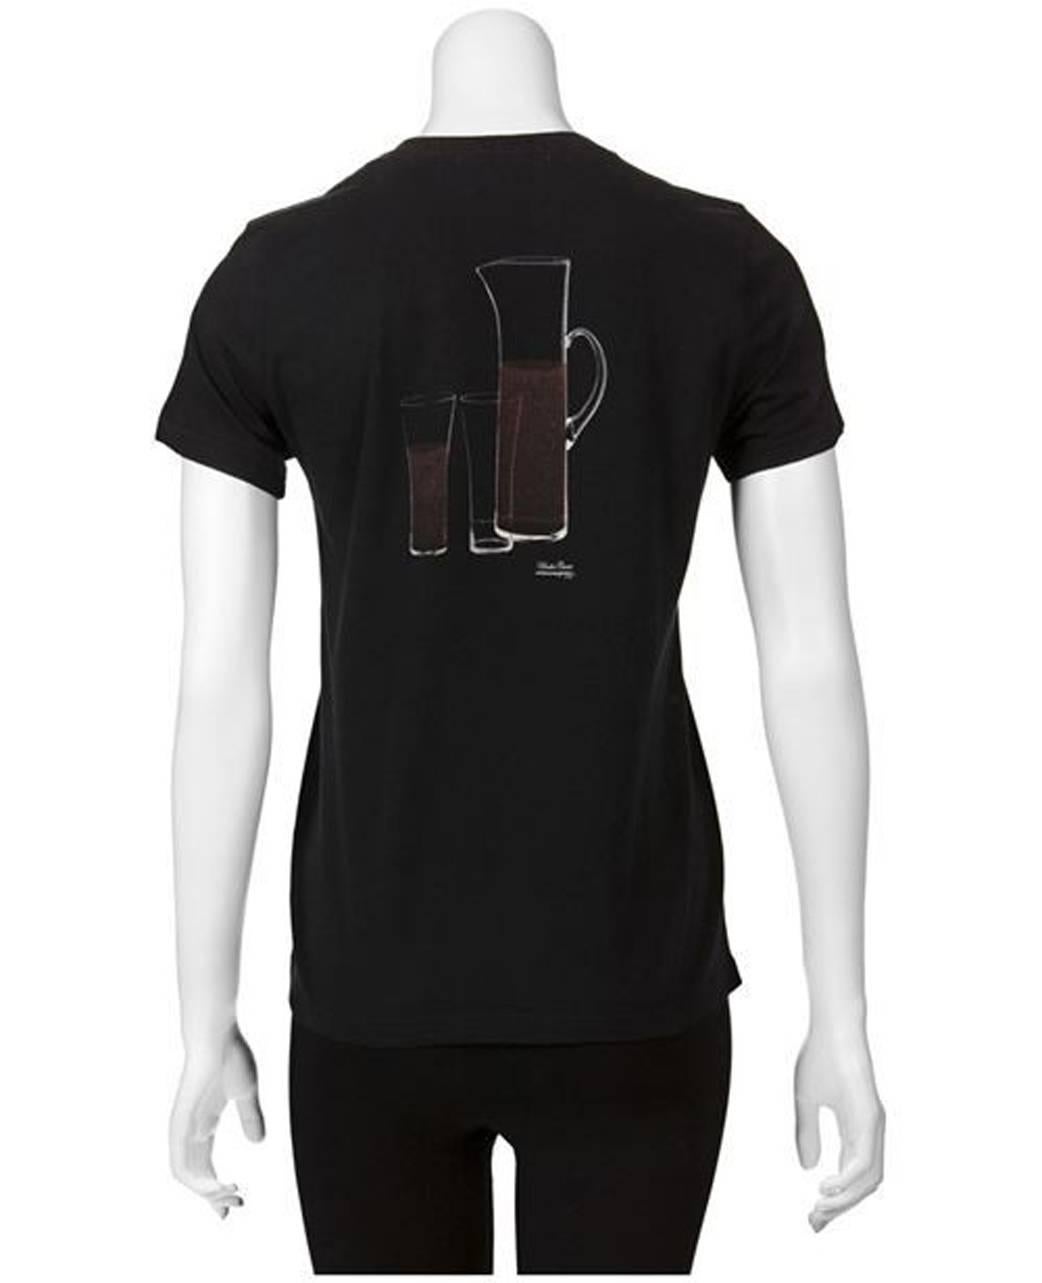 Undercover 'Kitted Drink' Black Cotton T-Shirt In New Condition For Sale In Laguna Beach, CA